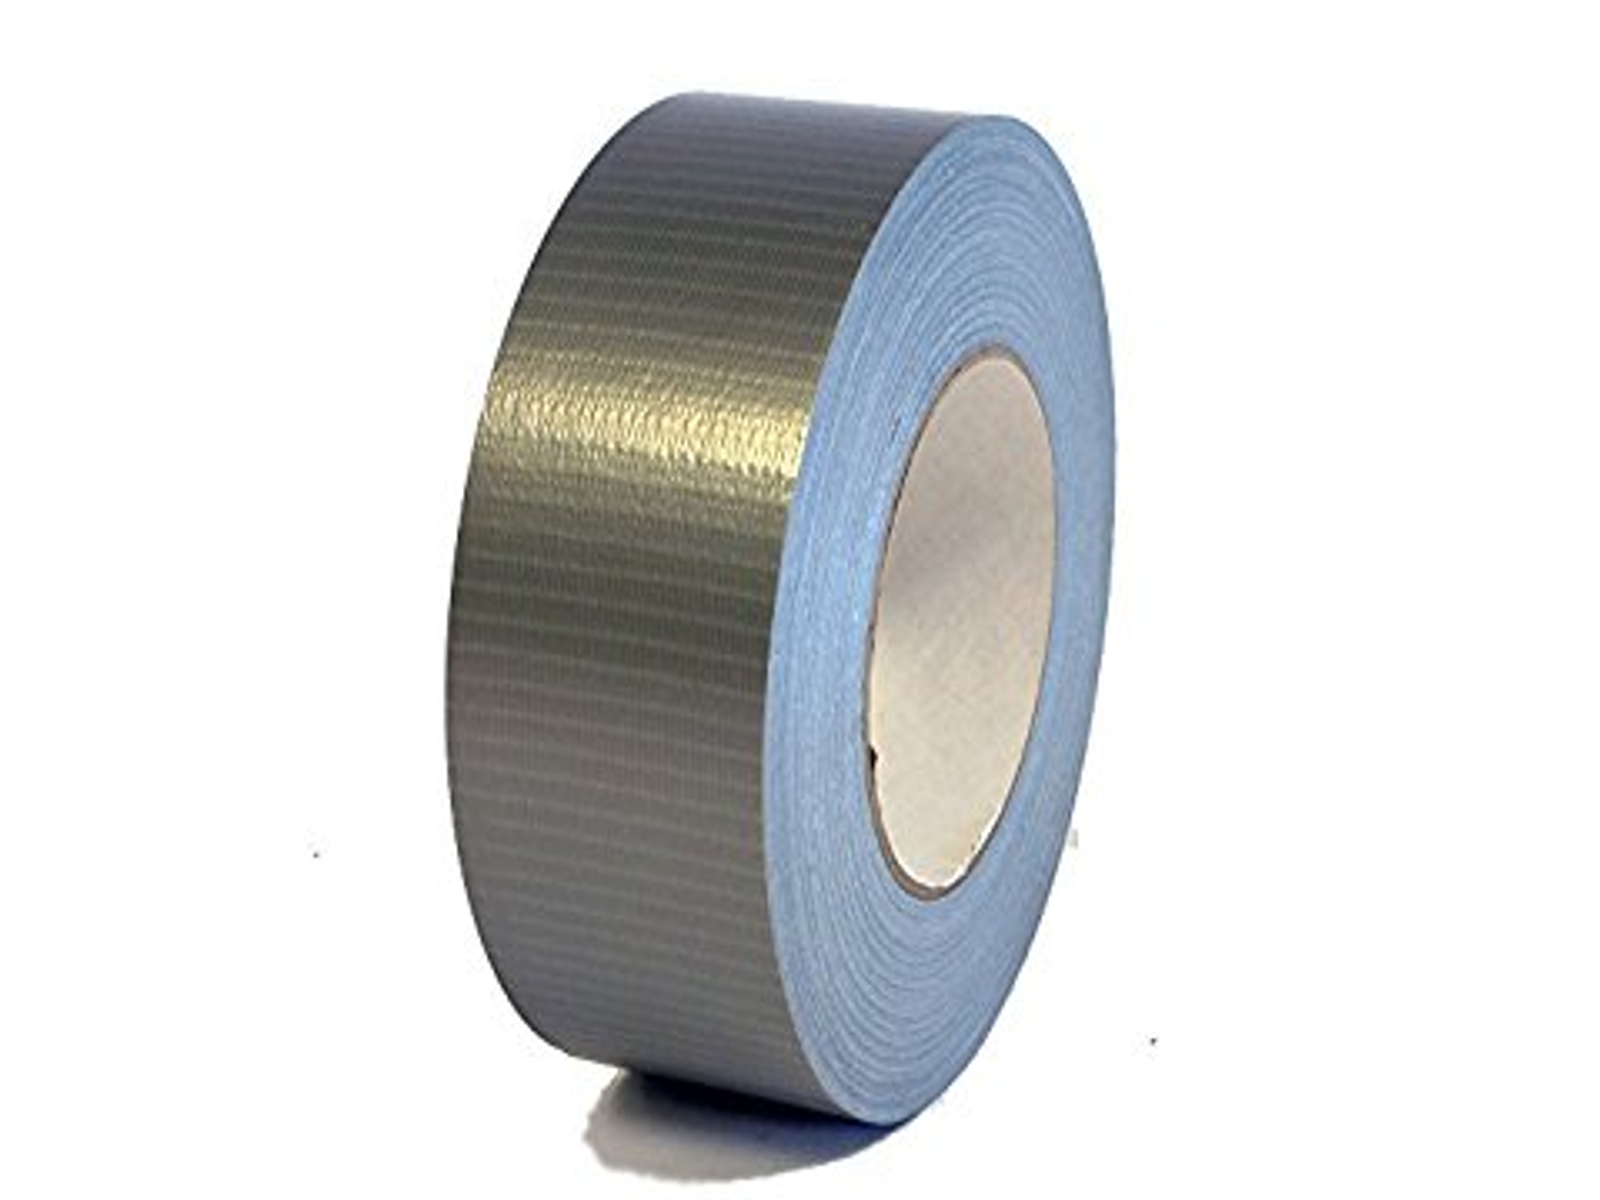 DUCT TAPE POLY-COATED CLOTH
BACKING. RUBBER ADHESIVE. 8
MIL 48MM X 46M 24/CA